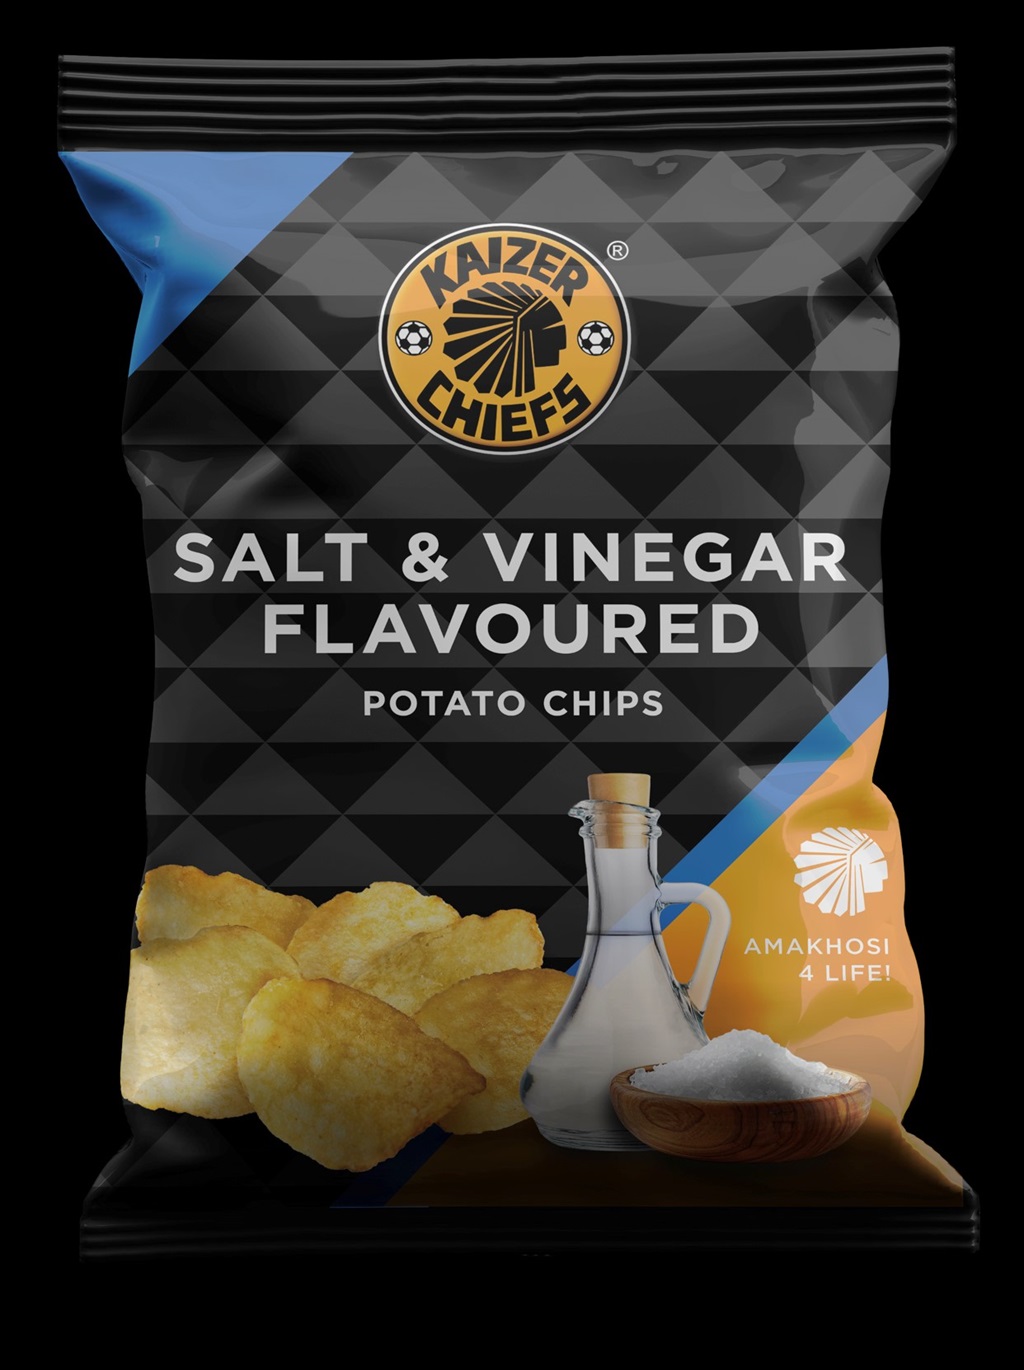 Kaizer Chiefs has revealed a new range of chips, with three different flavours available.